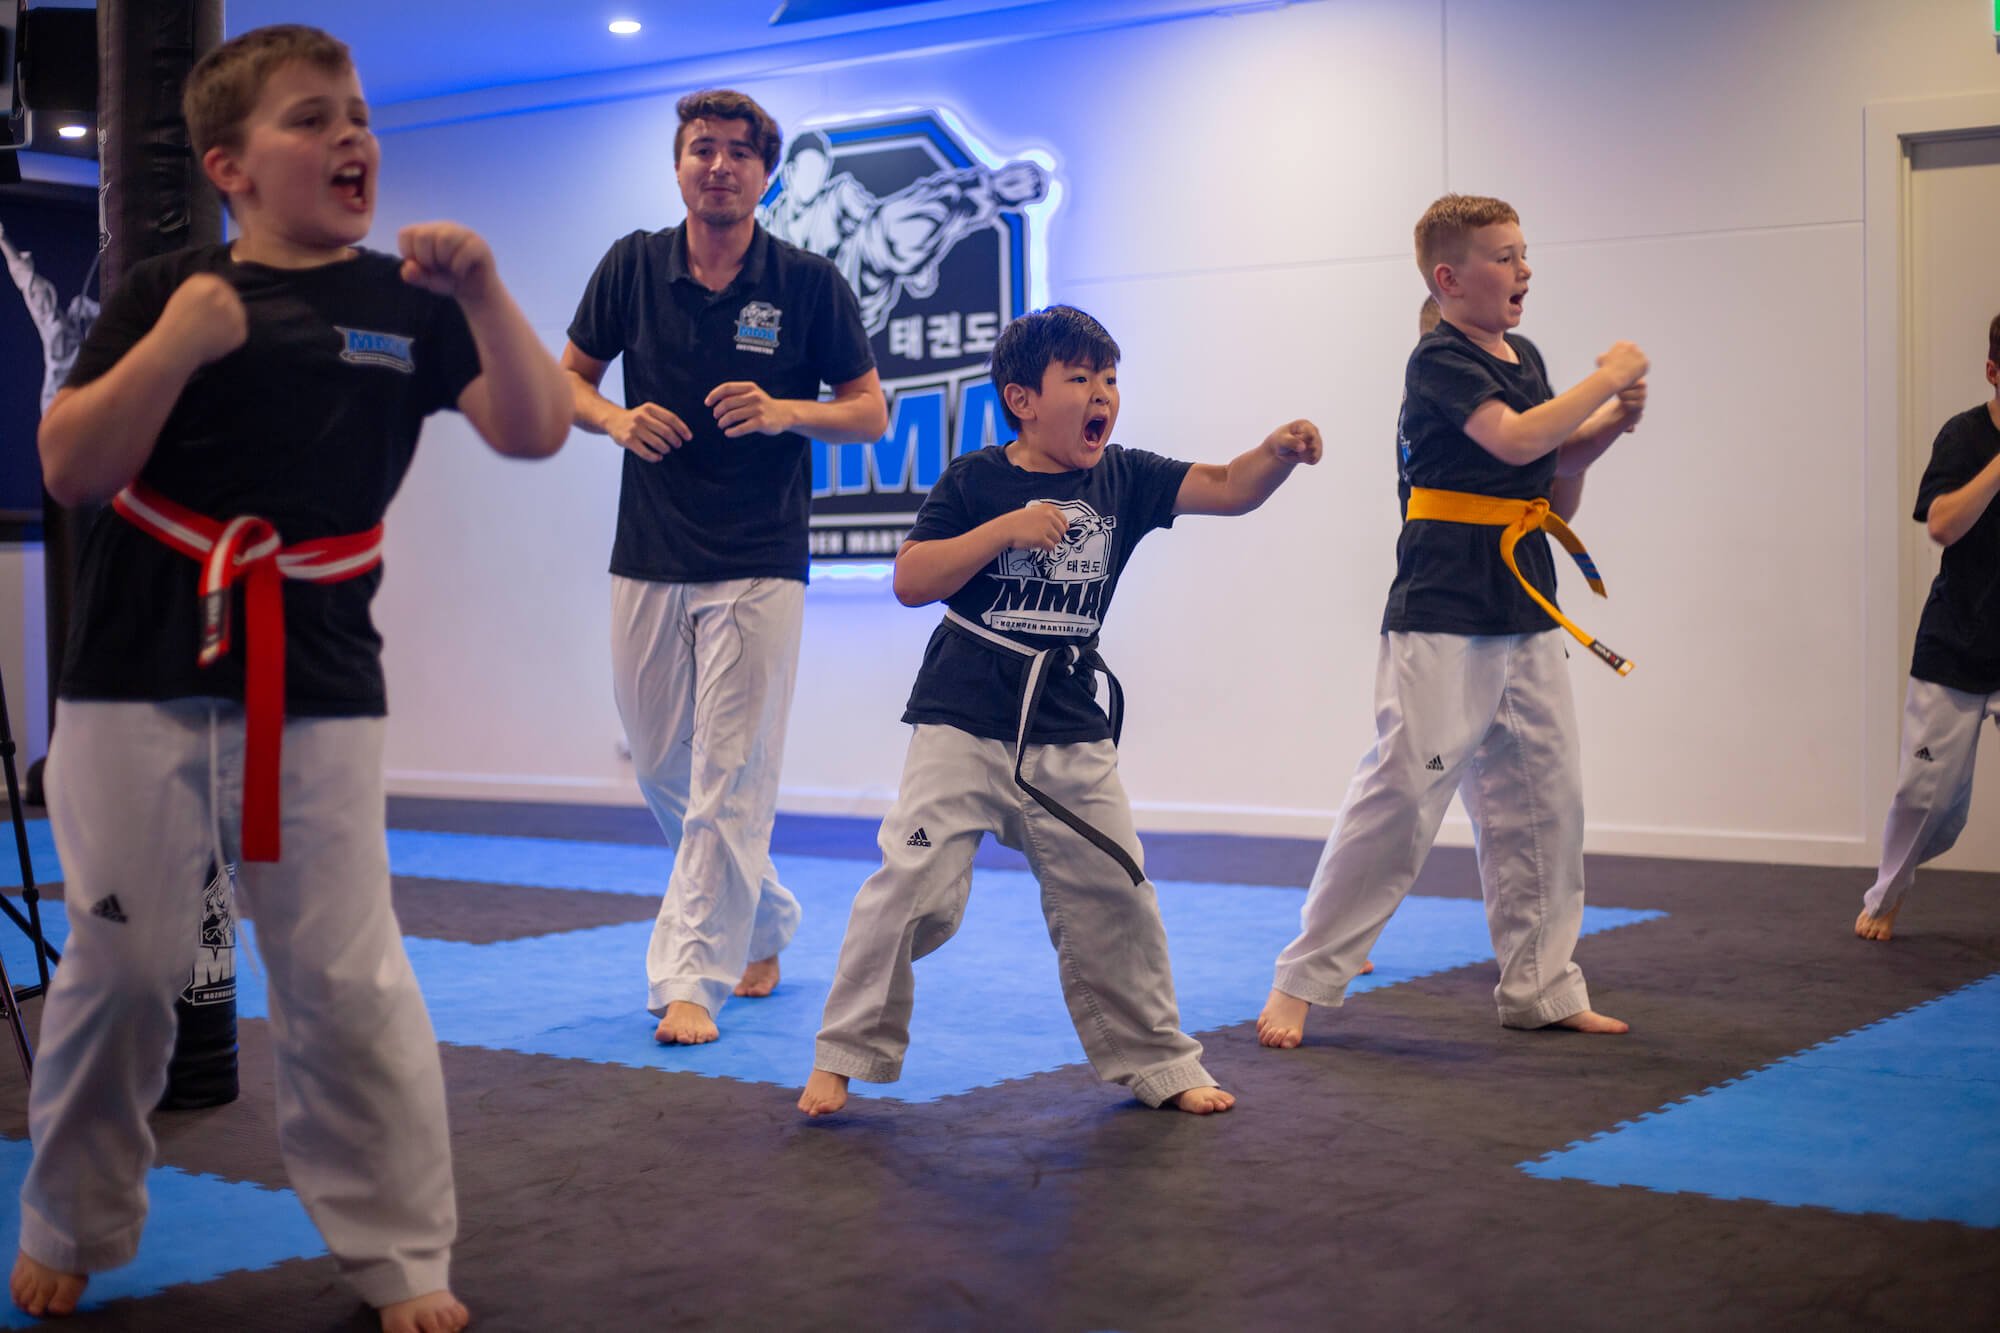 Boys Punching - Martial Arts _ Westgate Sports & Leisure Centre.jpg